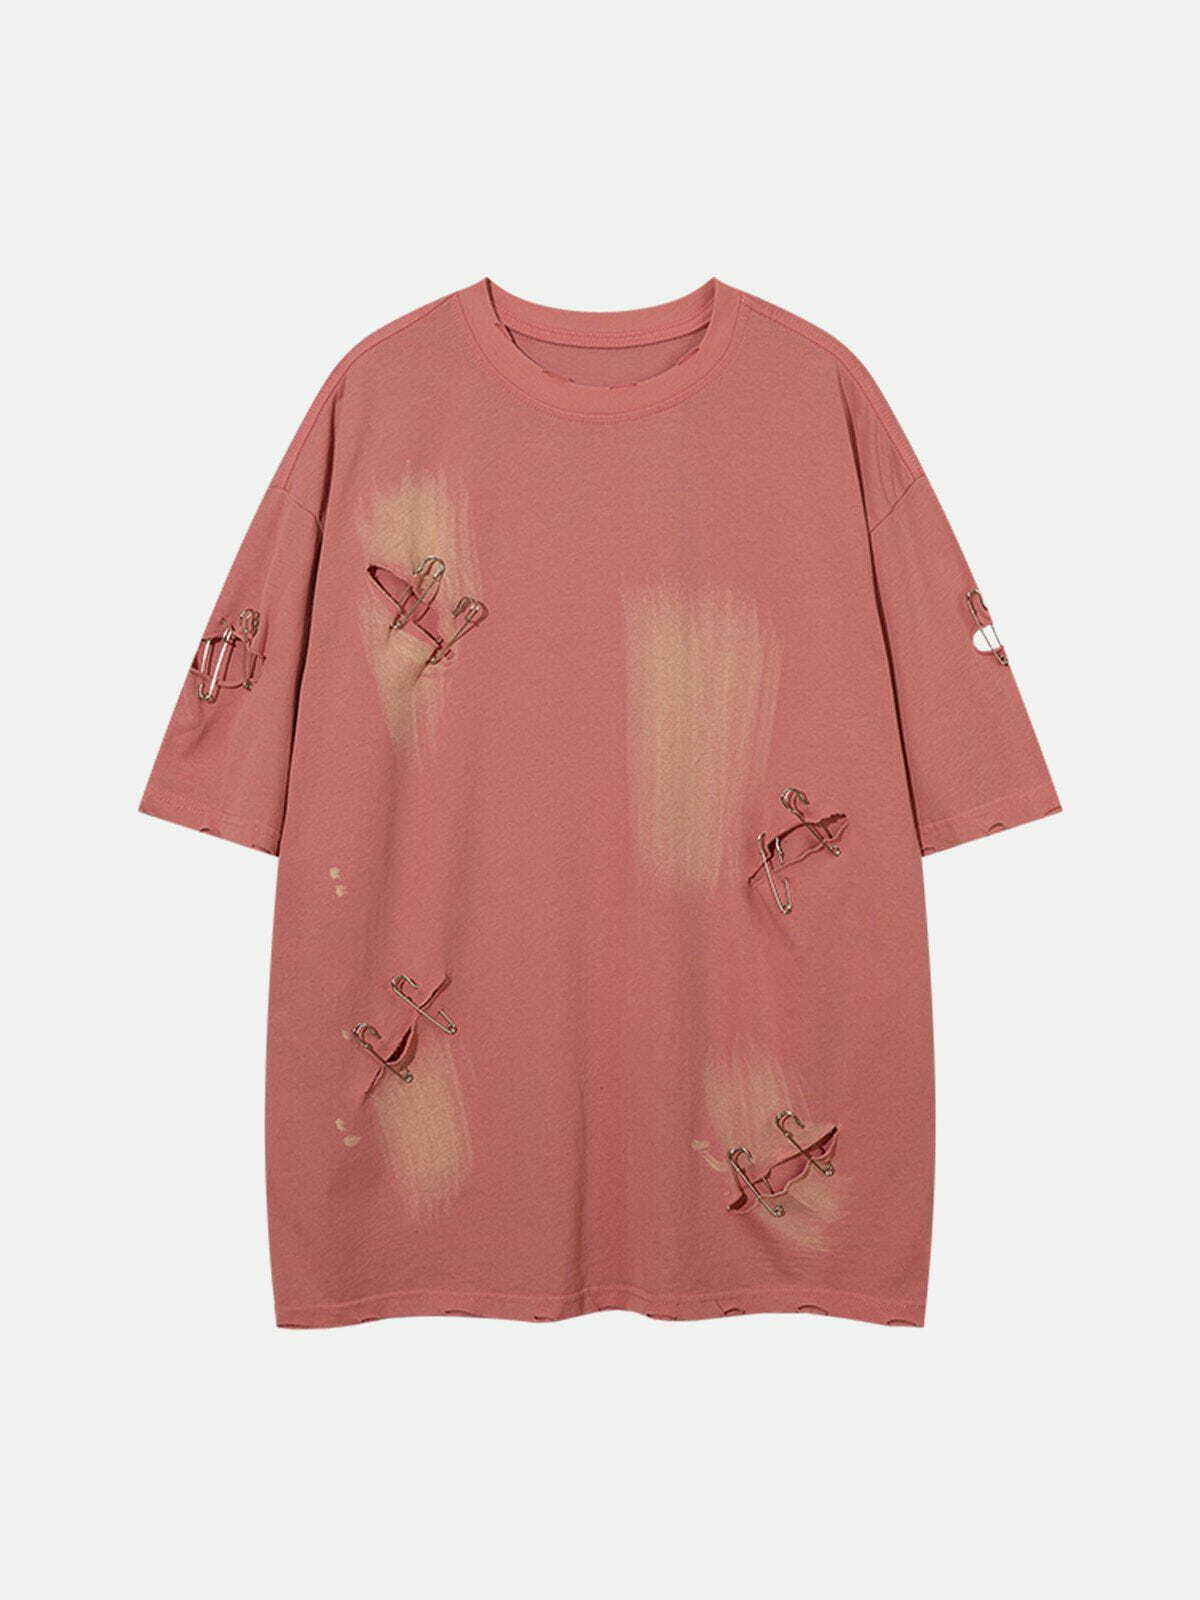 washed holes distressed tee edgy streetwear essential 1034